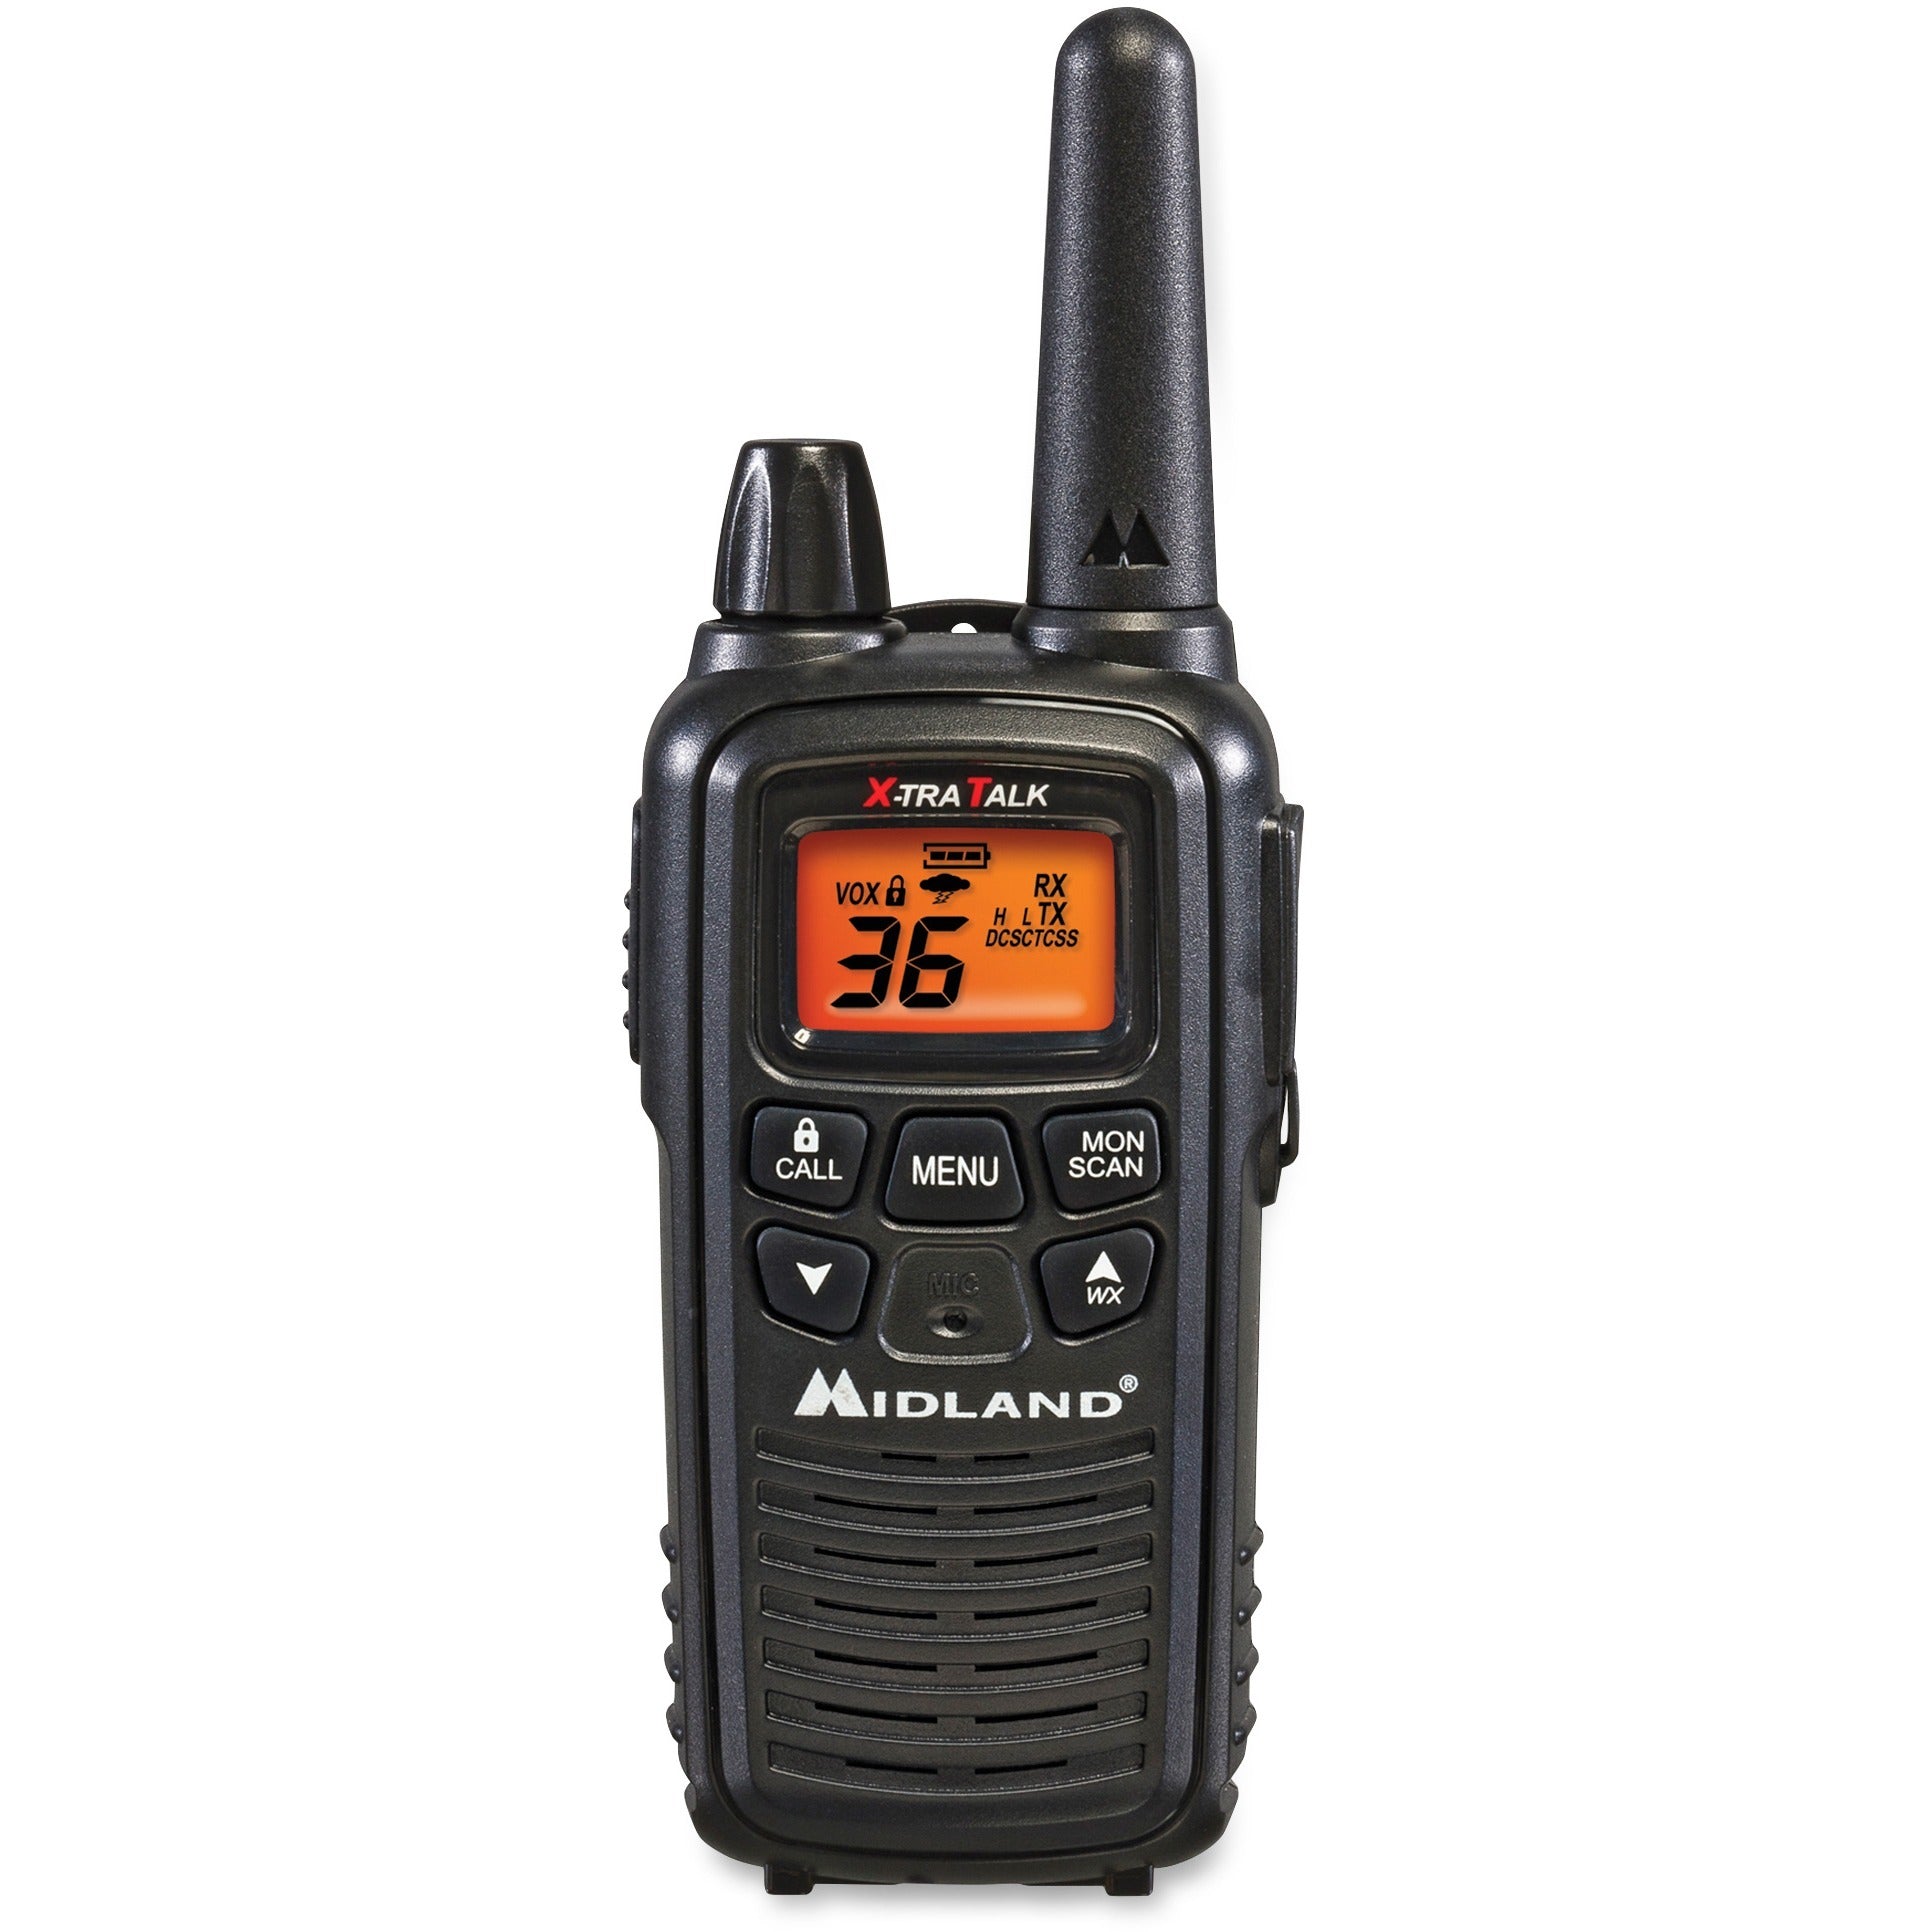 Midland LXT600VP3 Two-Way Radio - 36 Radio Channels - 22 GMRS/FRS - Upto 158400 ft - 121 Total Privacy Codes - Hands-free, Silent Operation - Water Resistant - Black - 2 Each - 